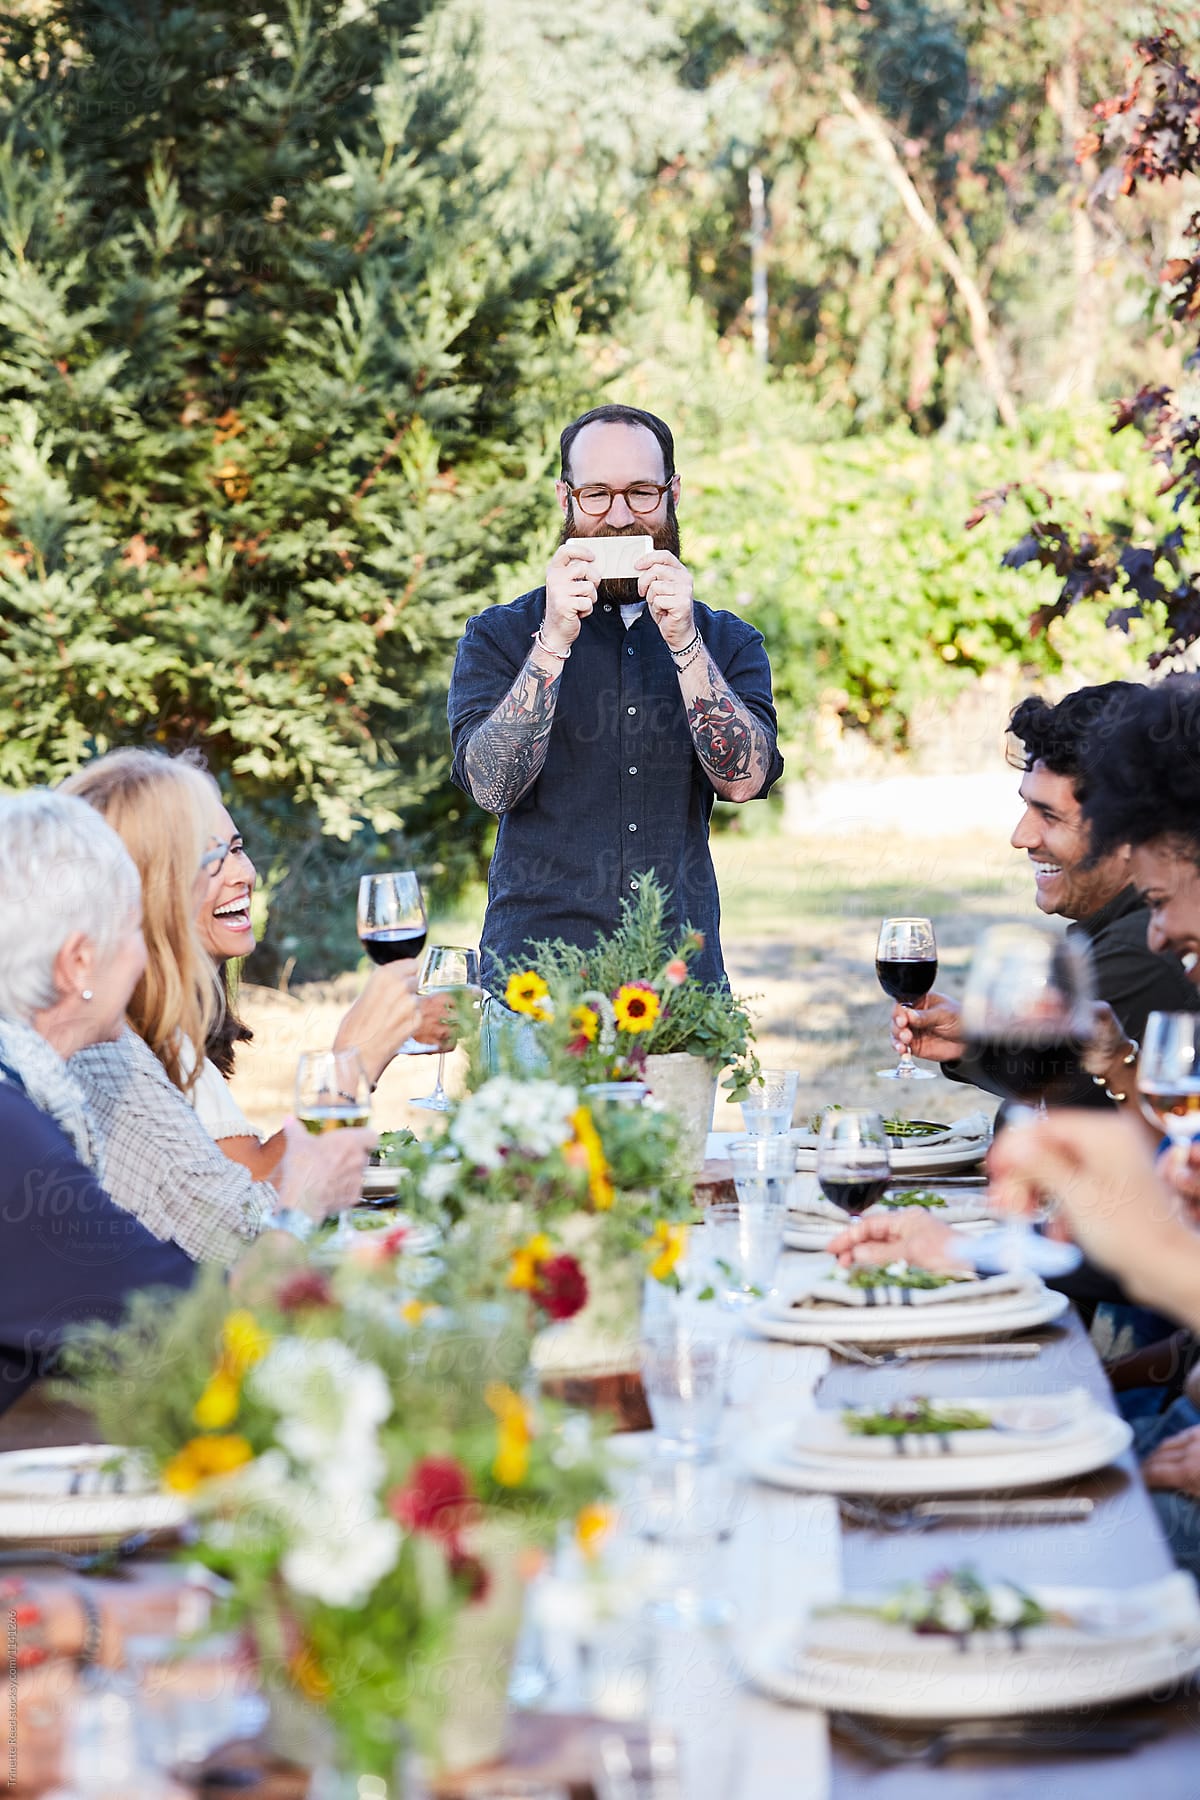 Man taking a photo at outdoor dinner party of friends